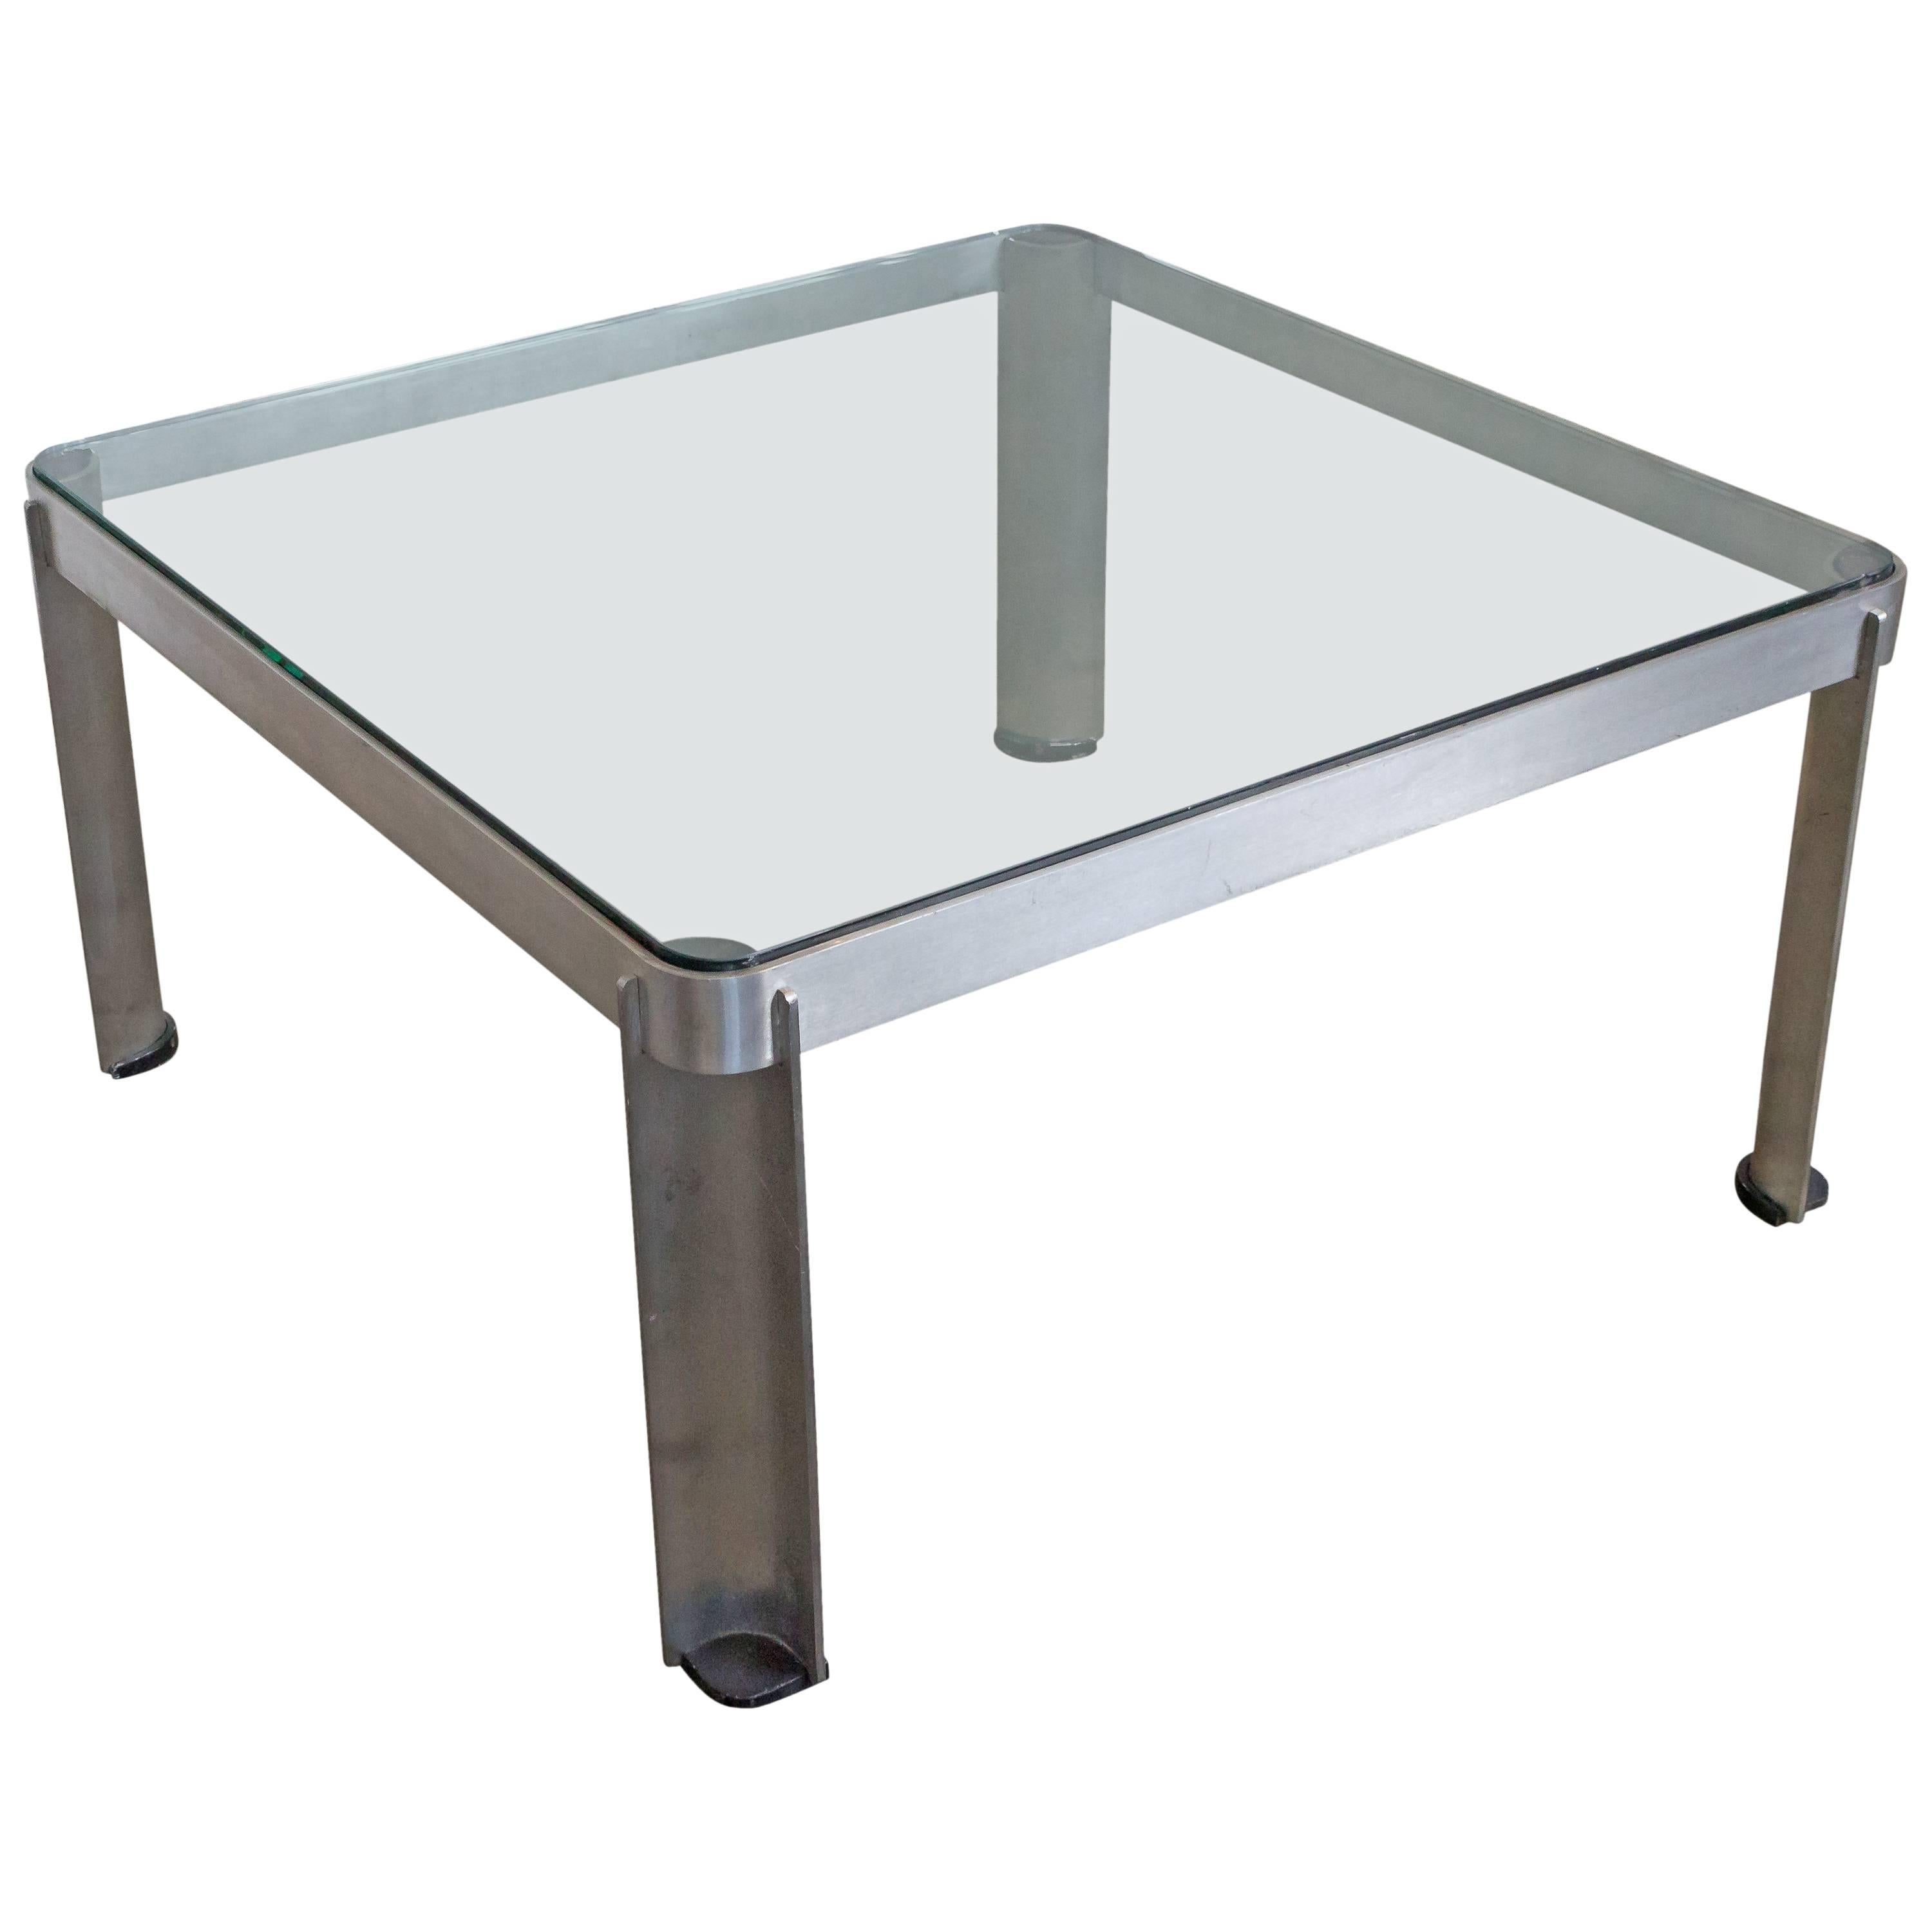 1980s French Aluminium and Glass Coffee Table For Sale